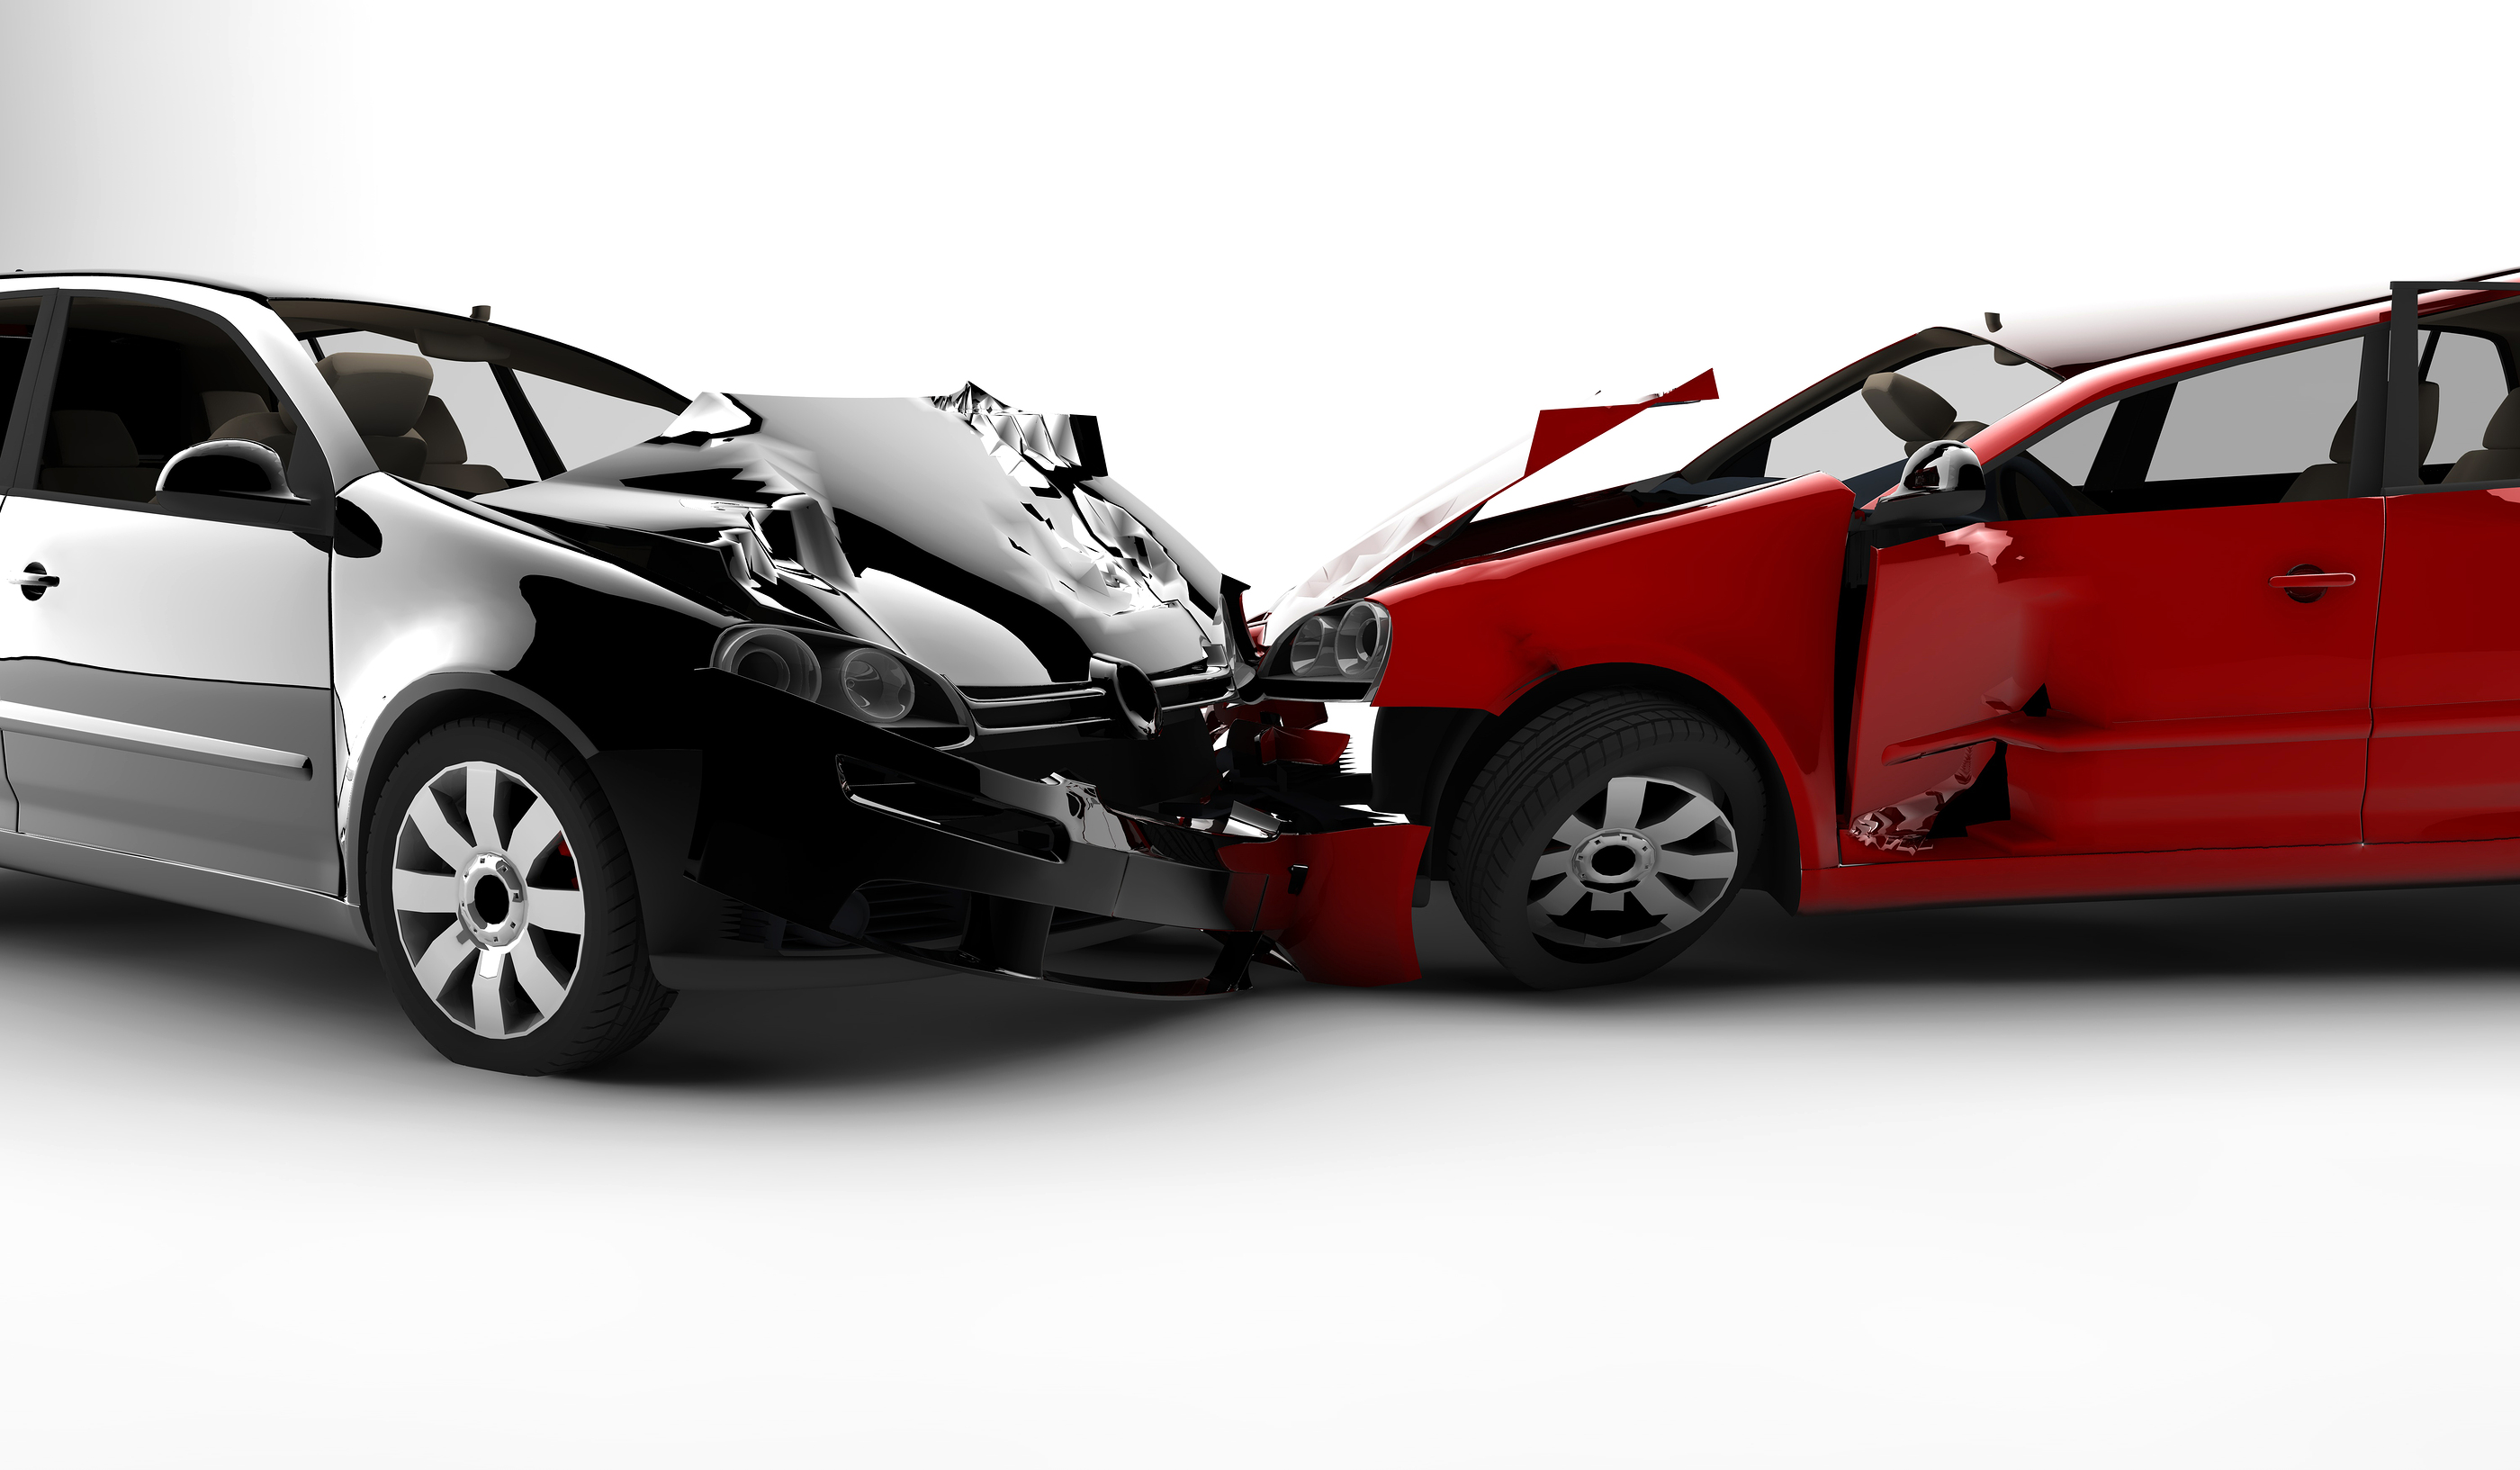 What should I do after a car accident depends on the details of the case